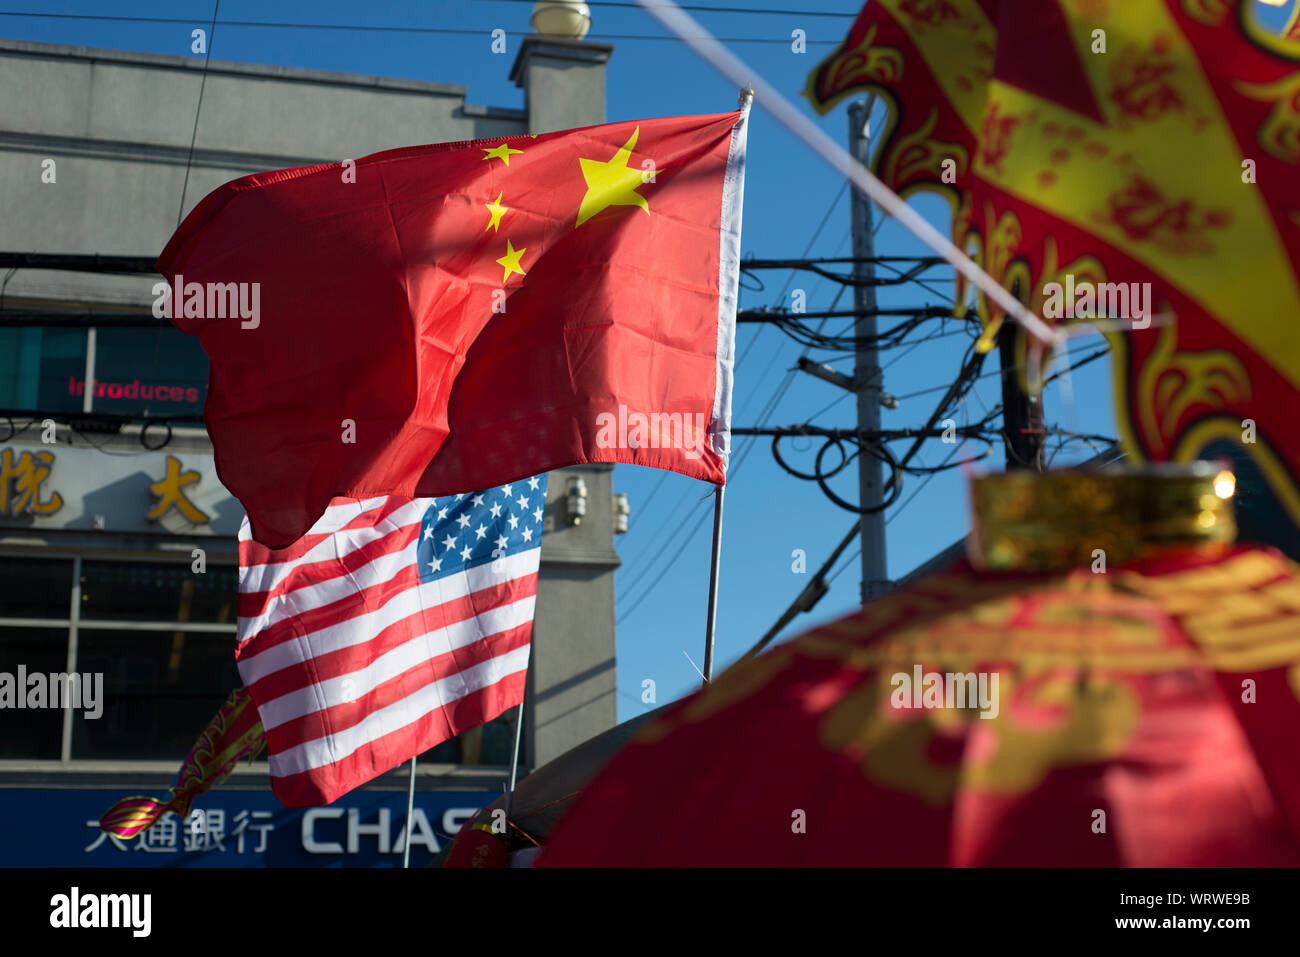 Chinese and American flags on 8th Avenue in the Brooklyn, New York Chinatown. Stock Photo